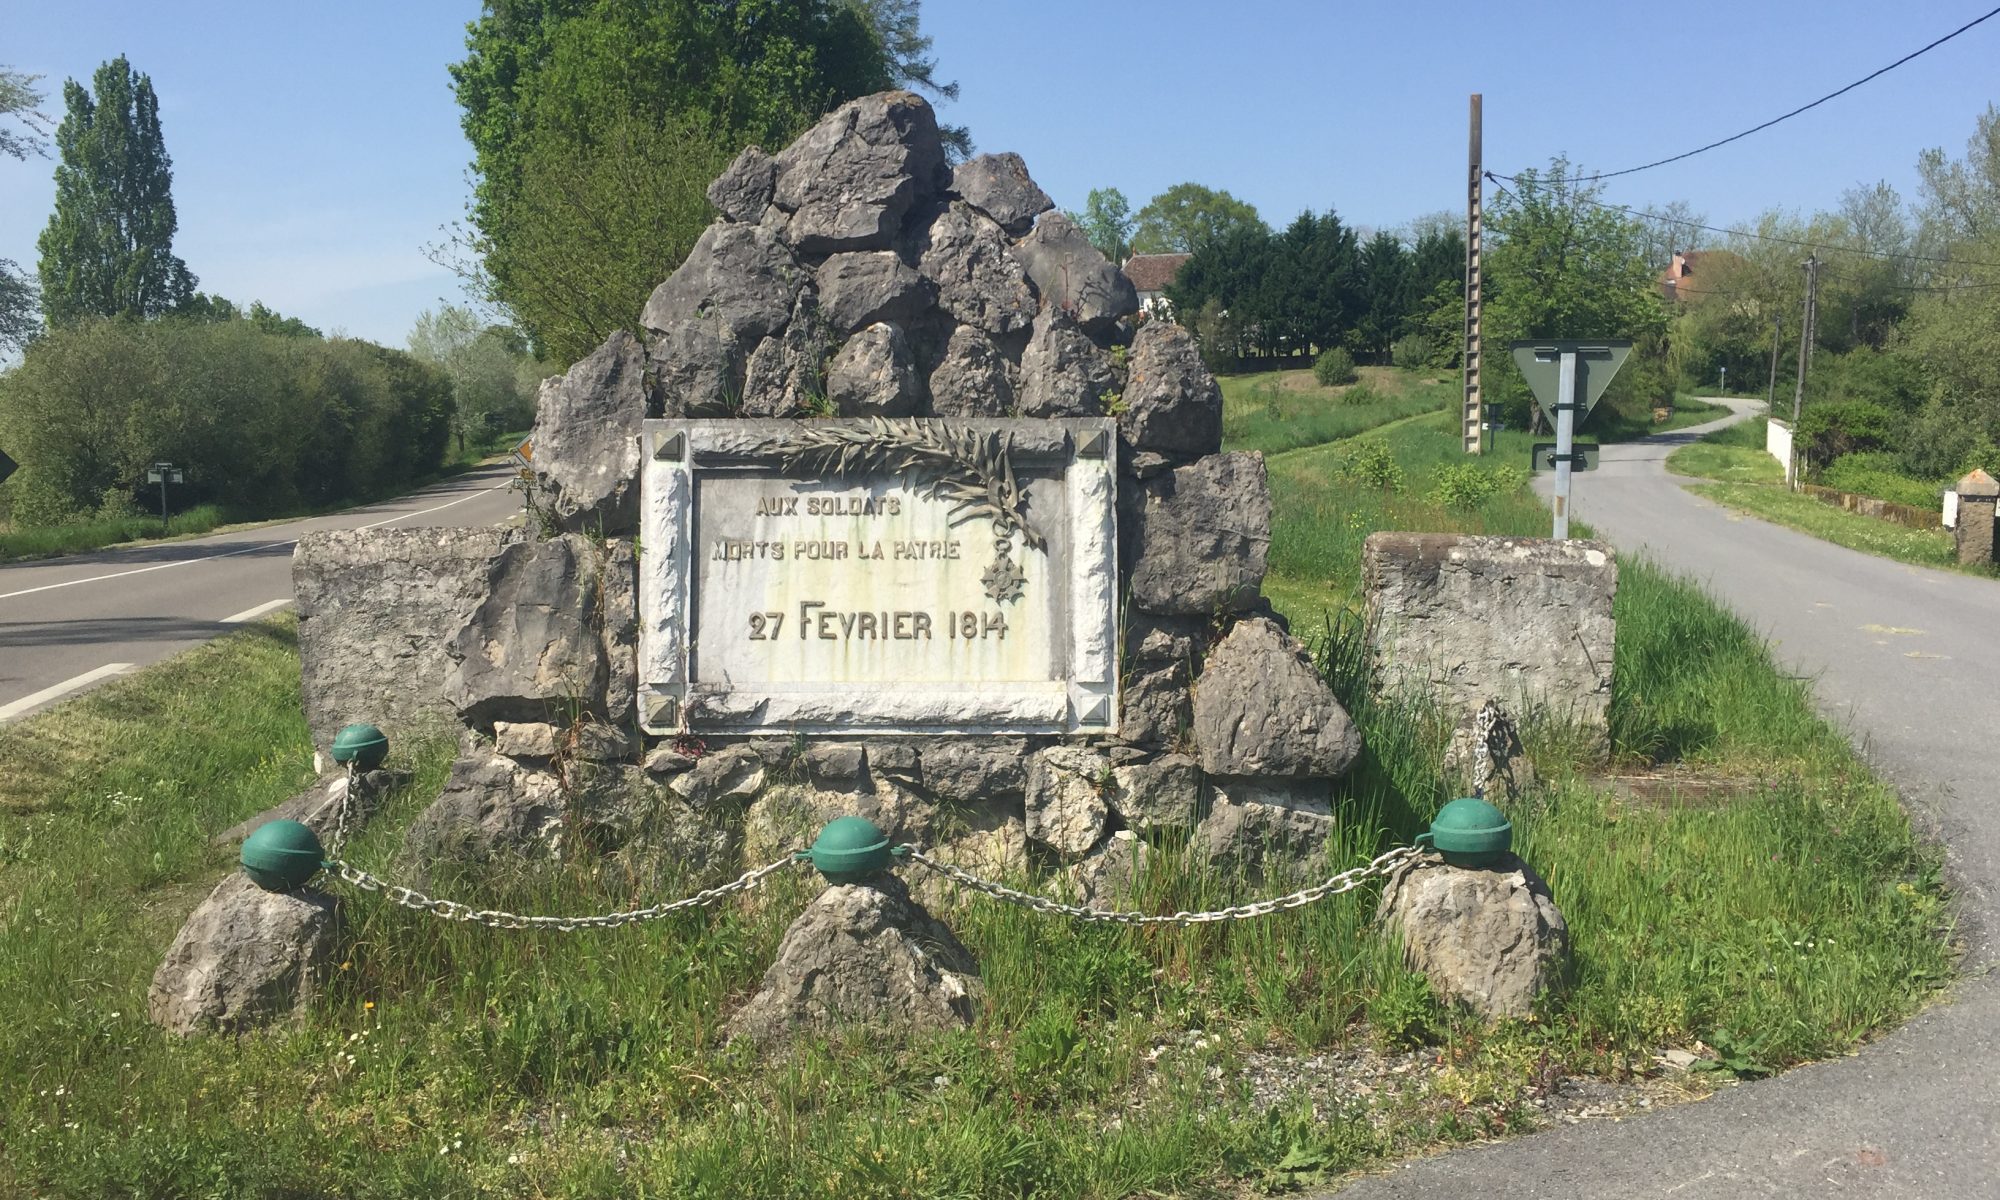 Memorial to Foy’s men at the battle of Orthez